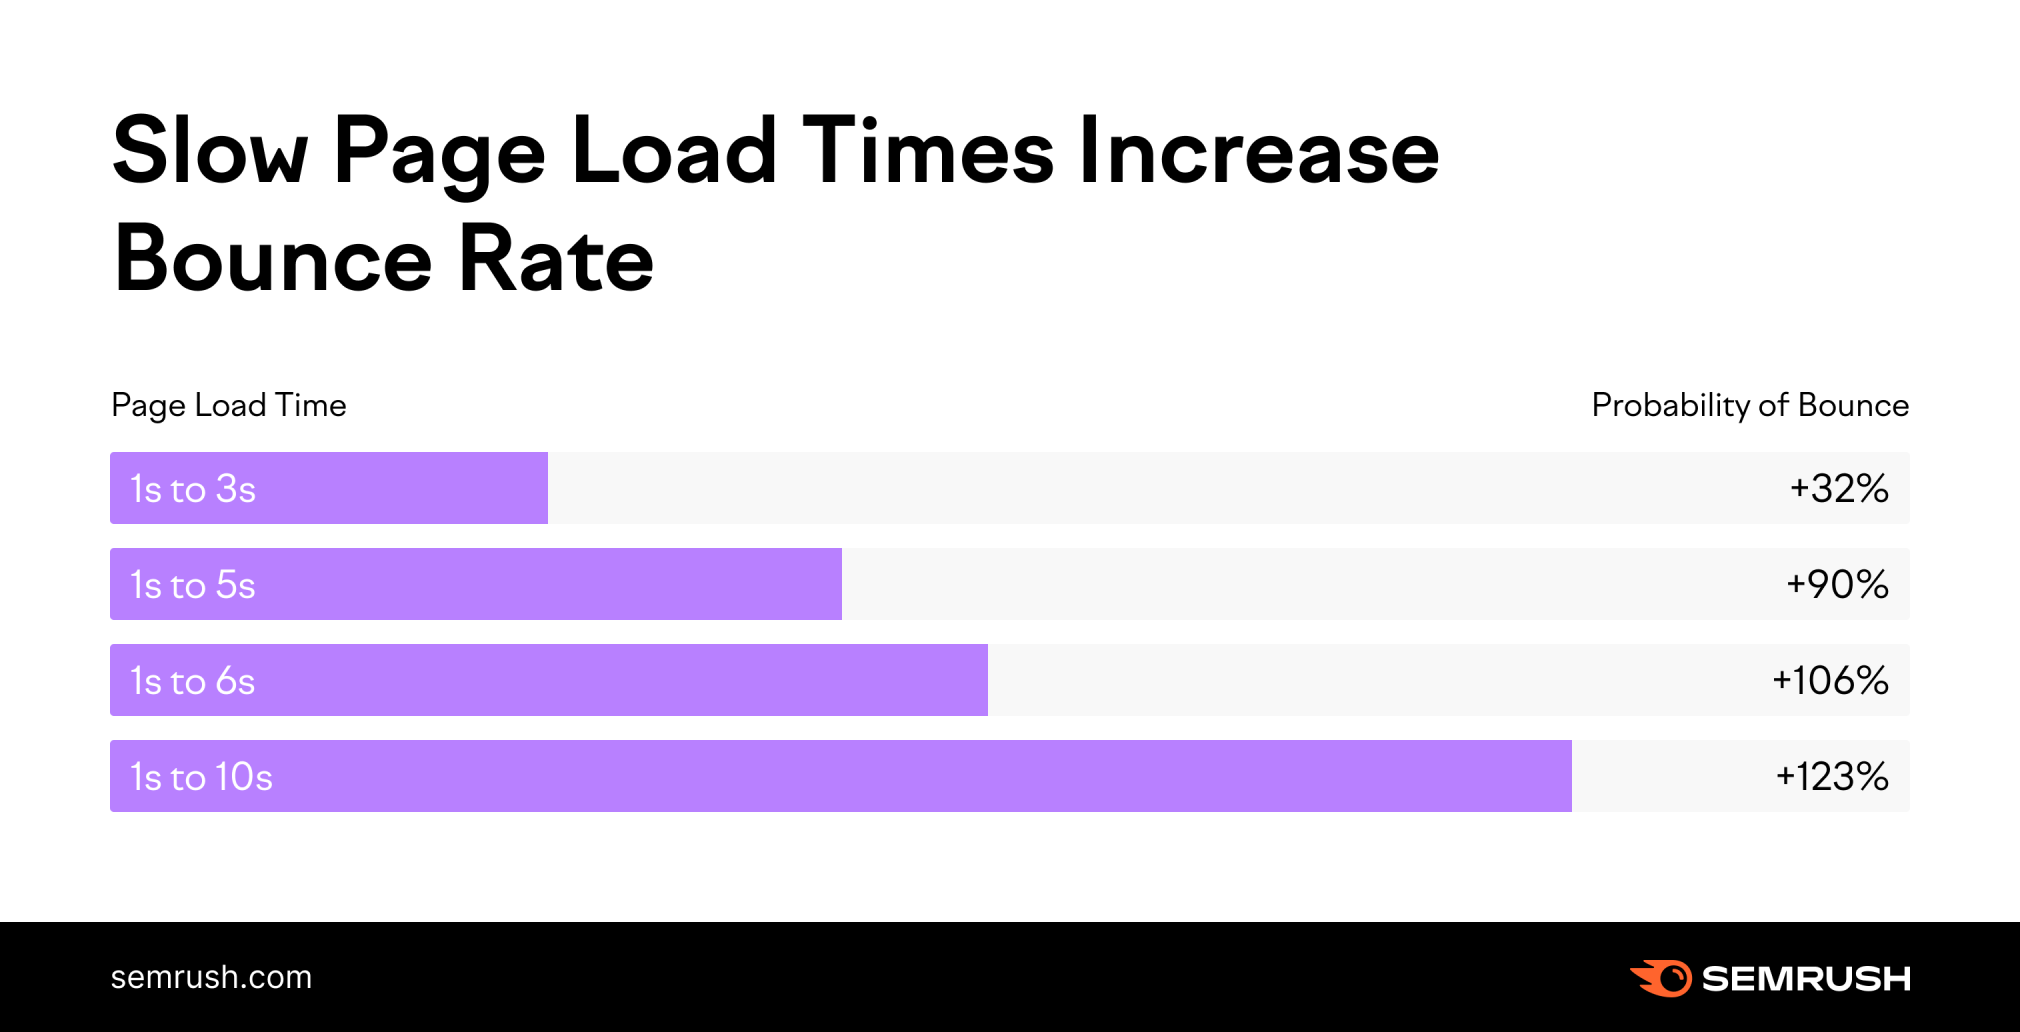 Slow page load times increase bounce rates